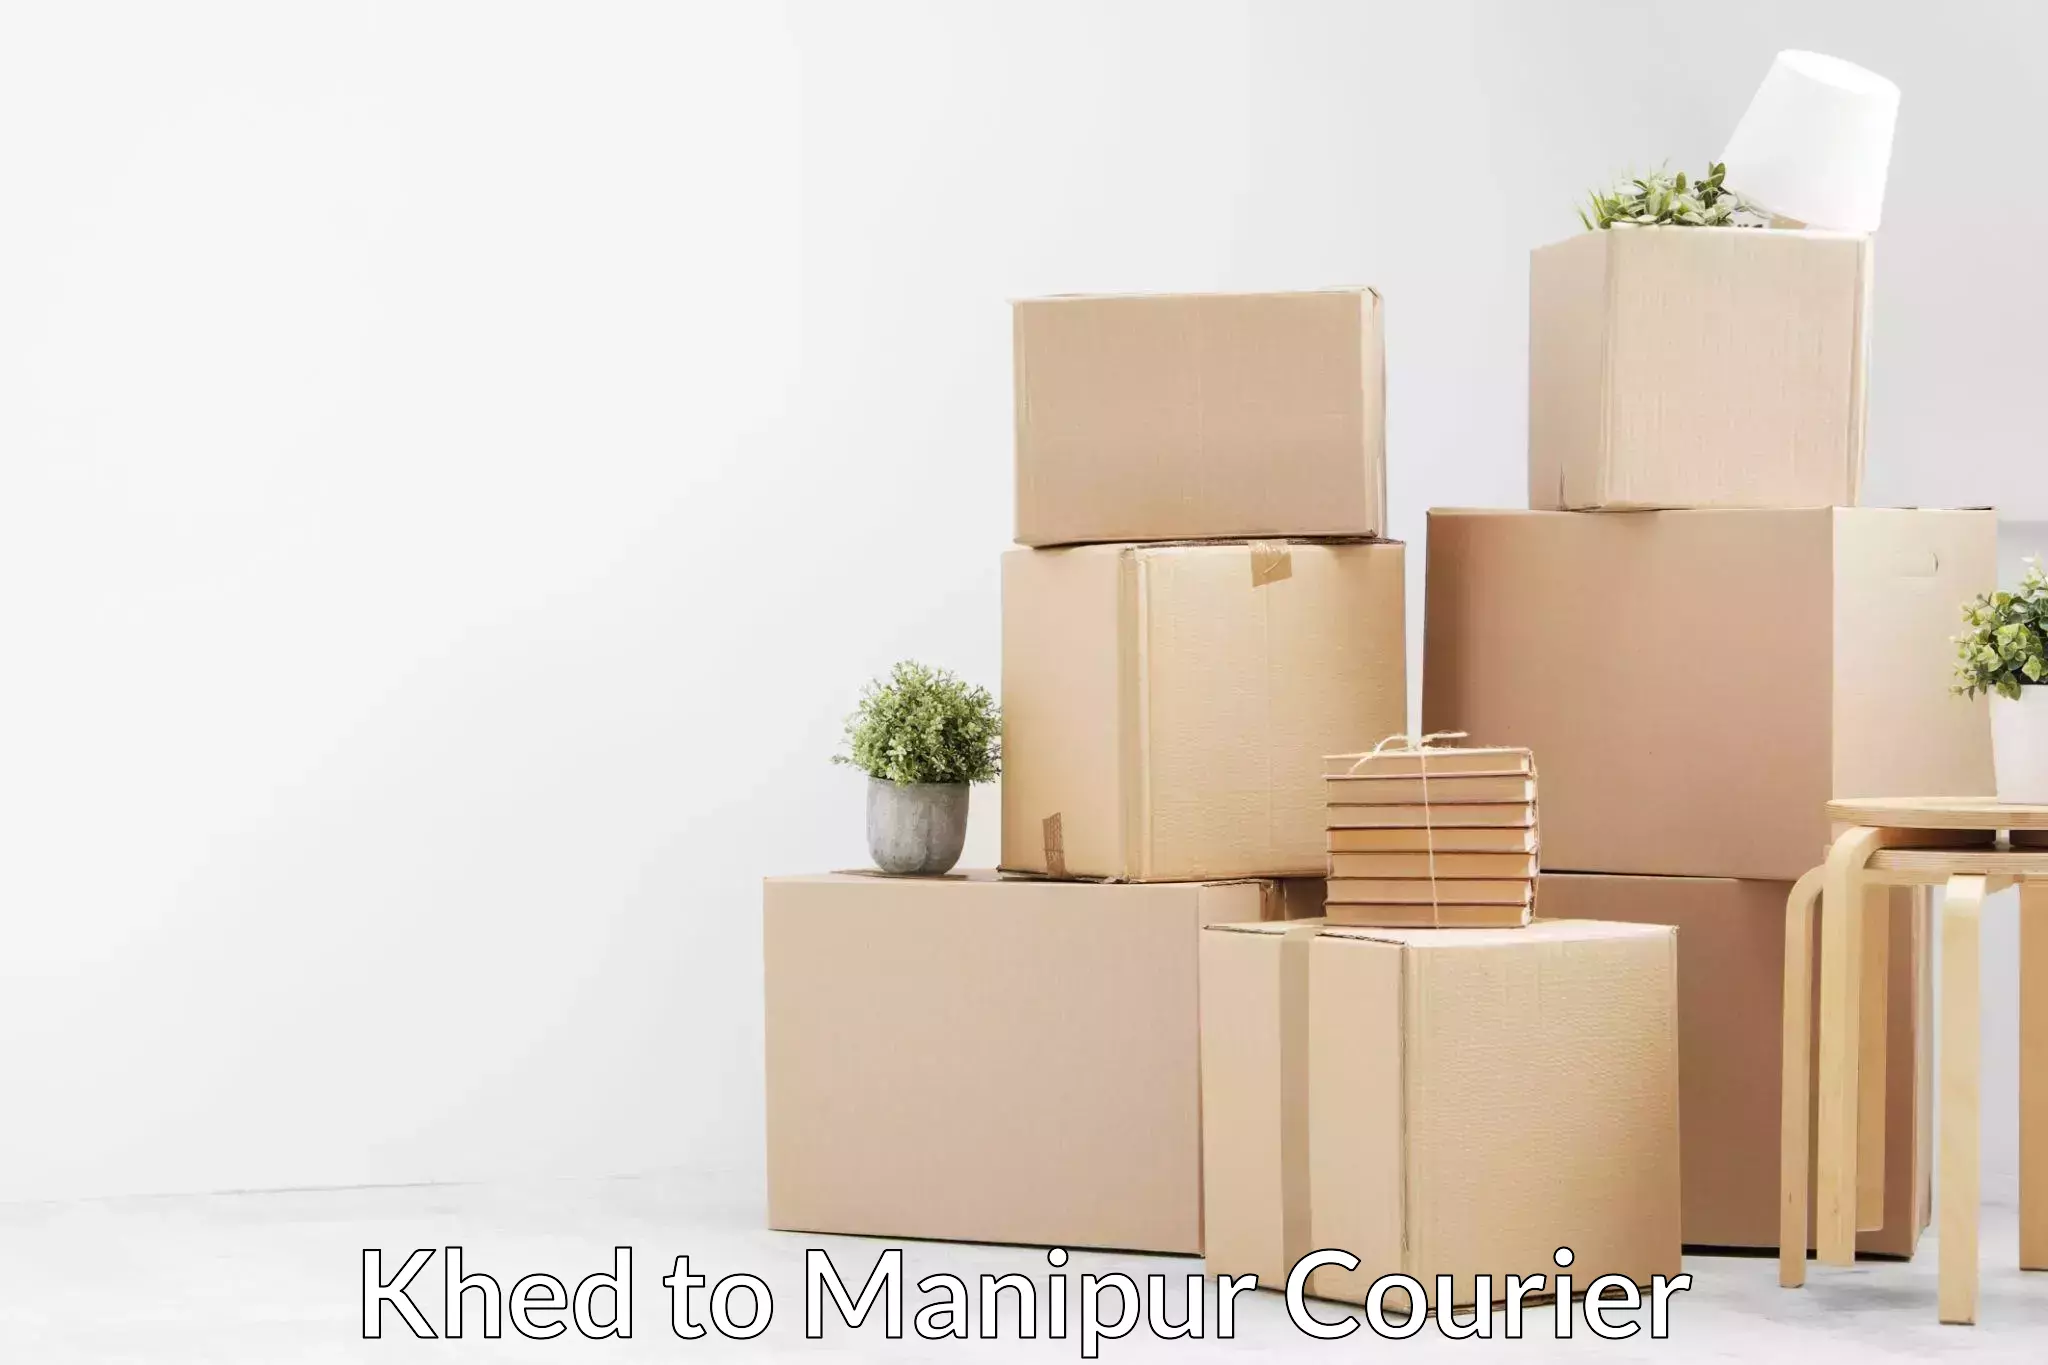 Hassle-free relocation Khed to Churachandpur